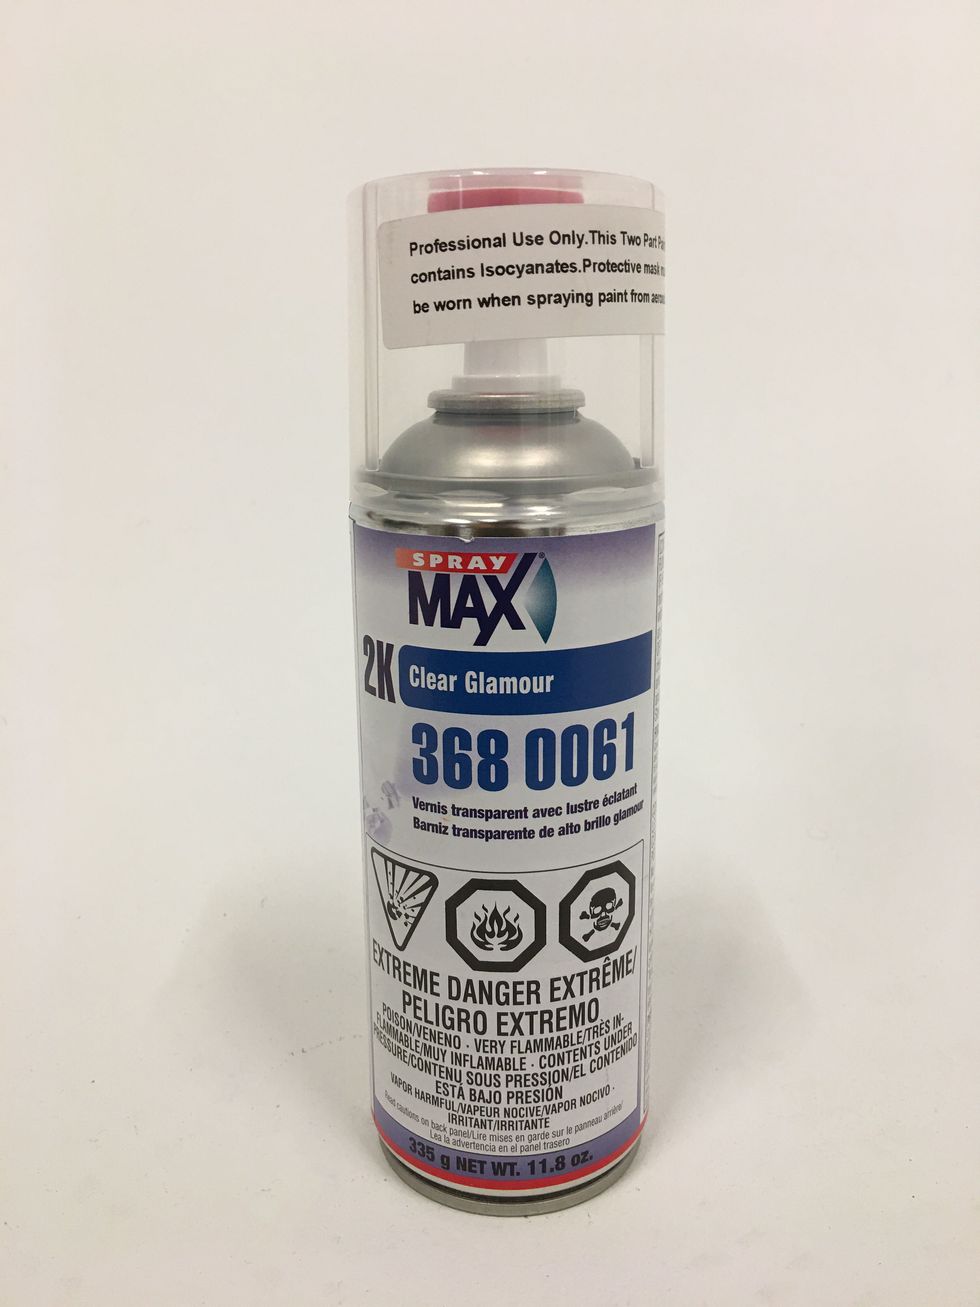 SprayMax 2K Clear - Automotive Grade High Gloss Clearcoat Top Coat